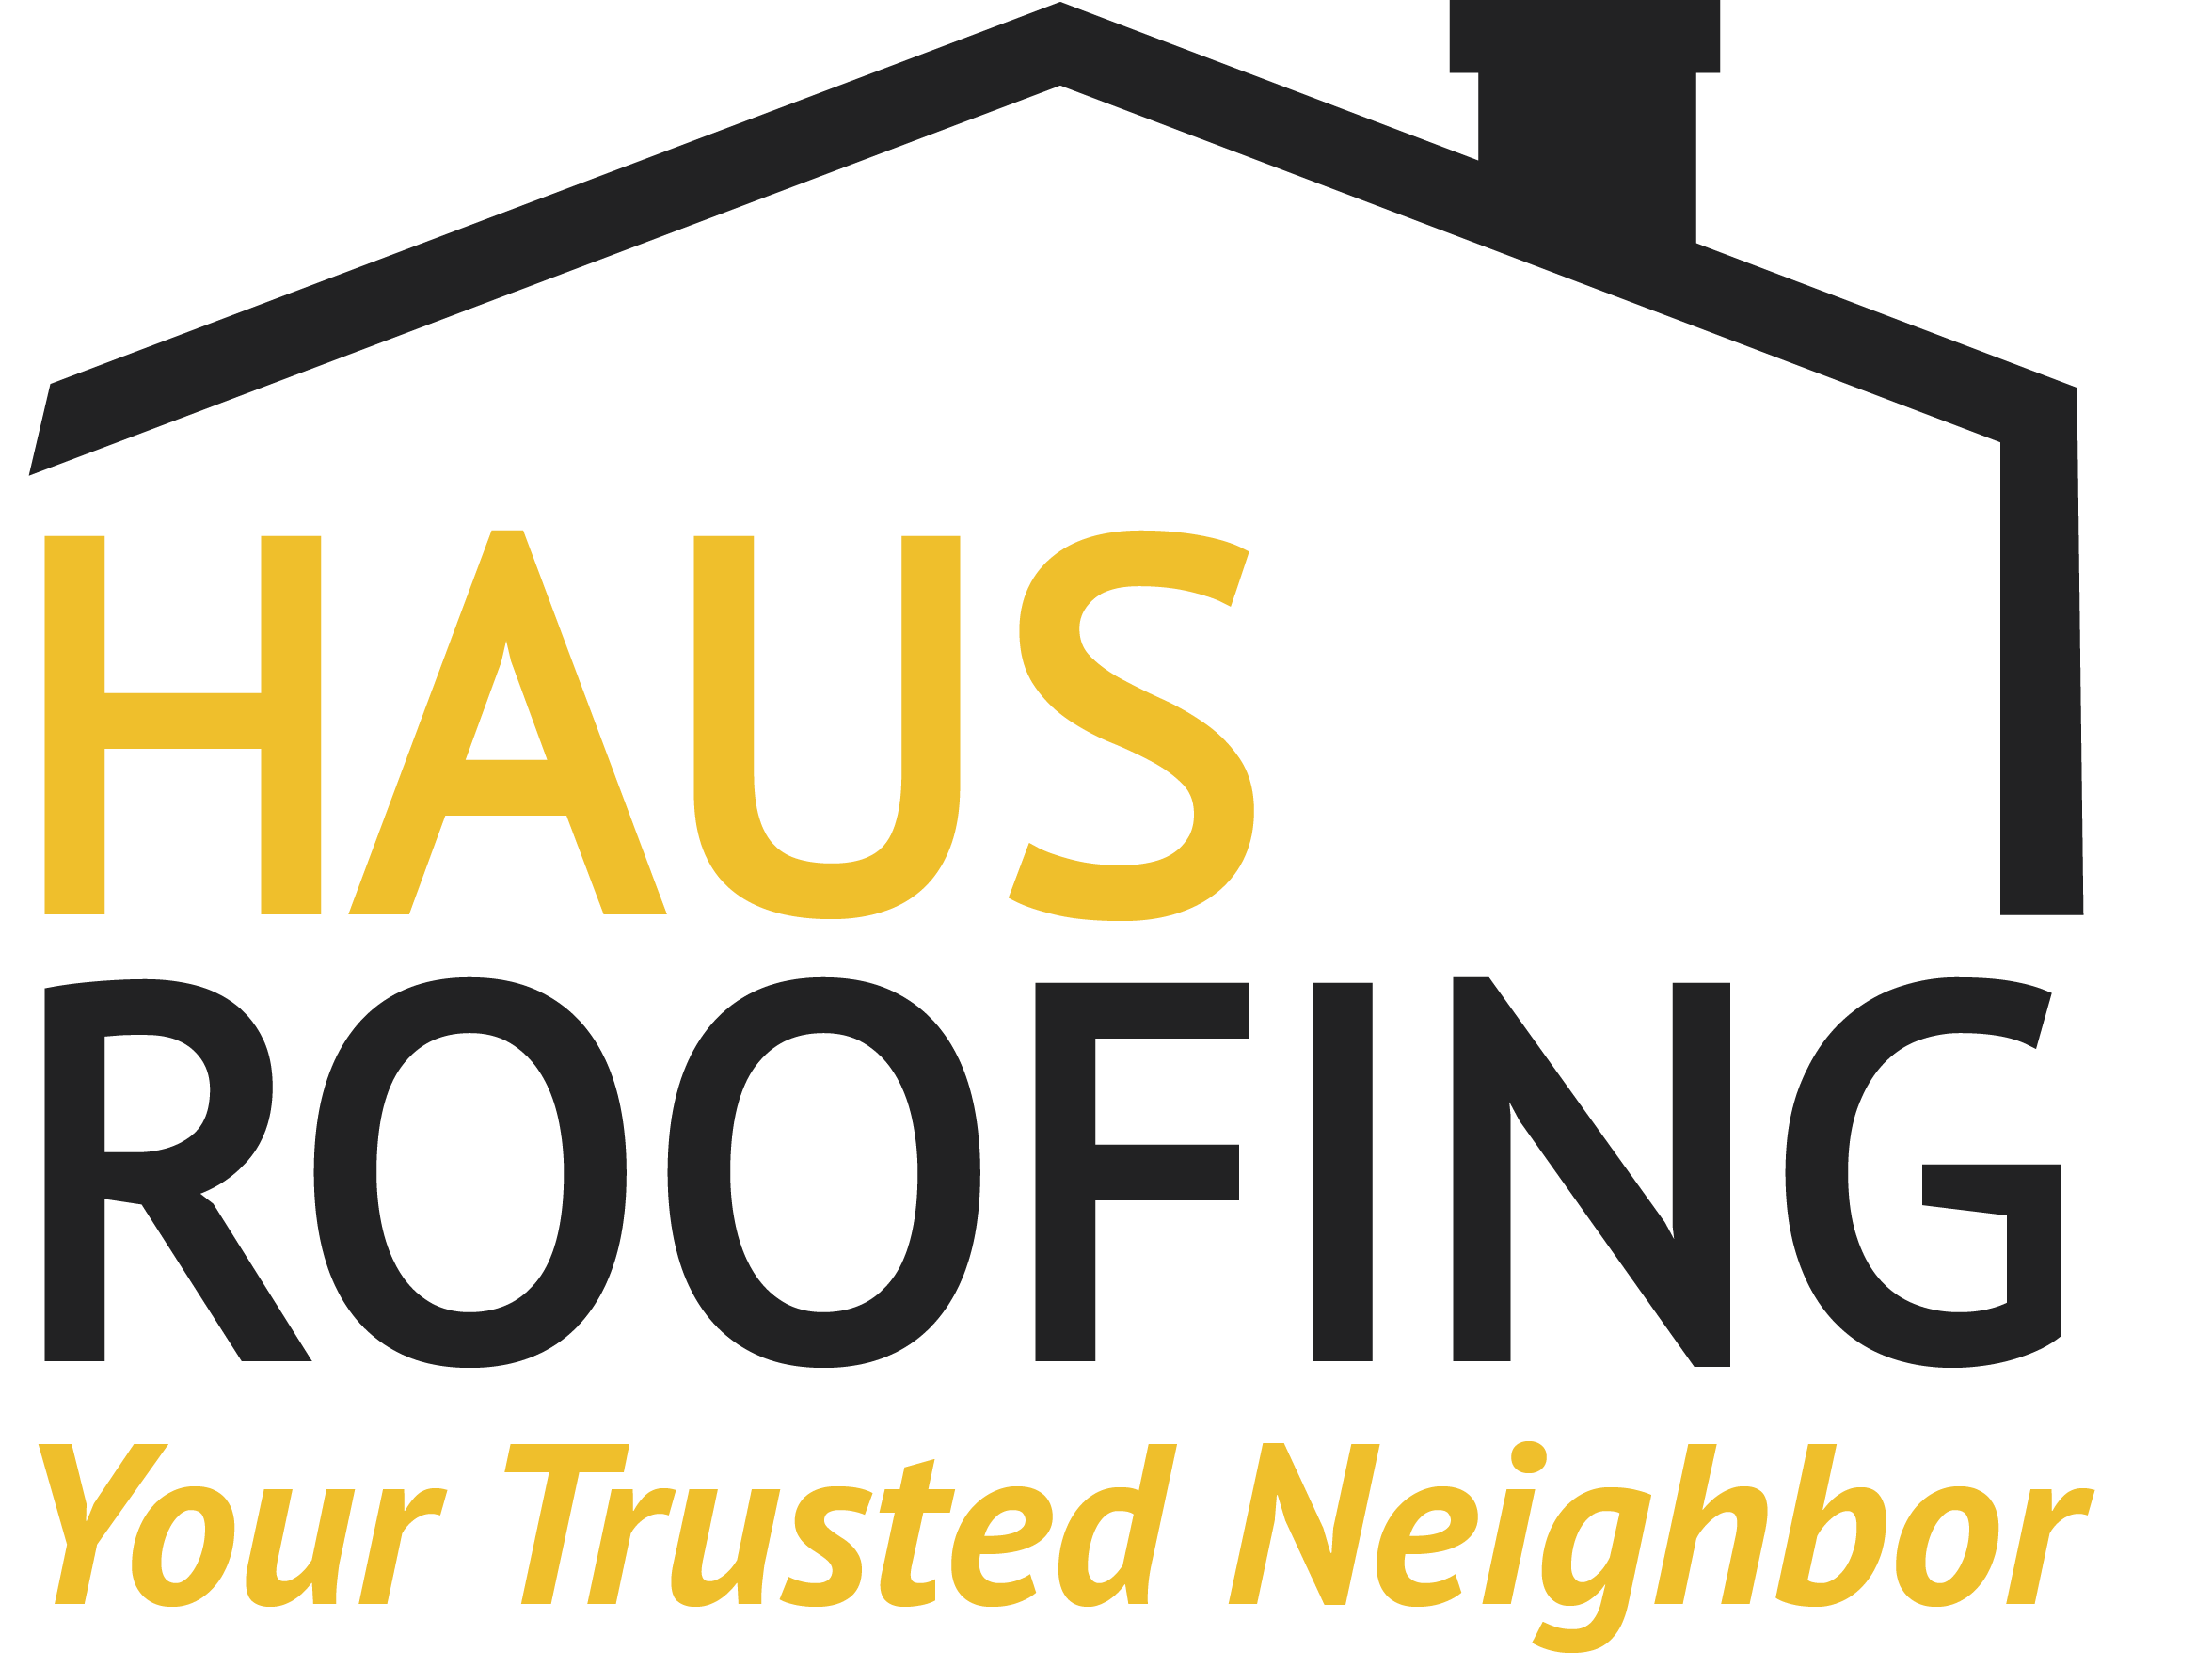 Haus Roofing and Construction Services Logo